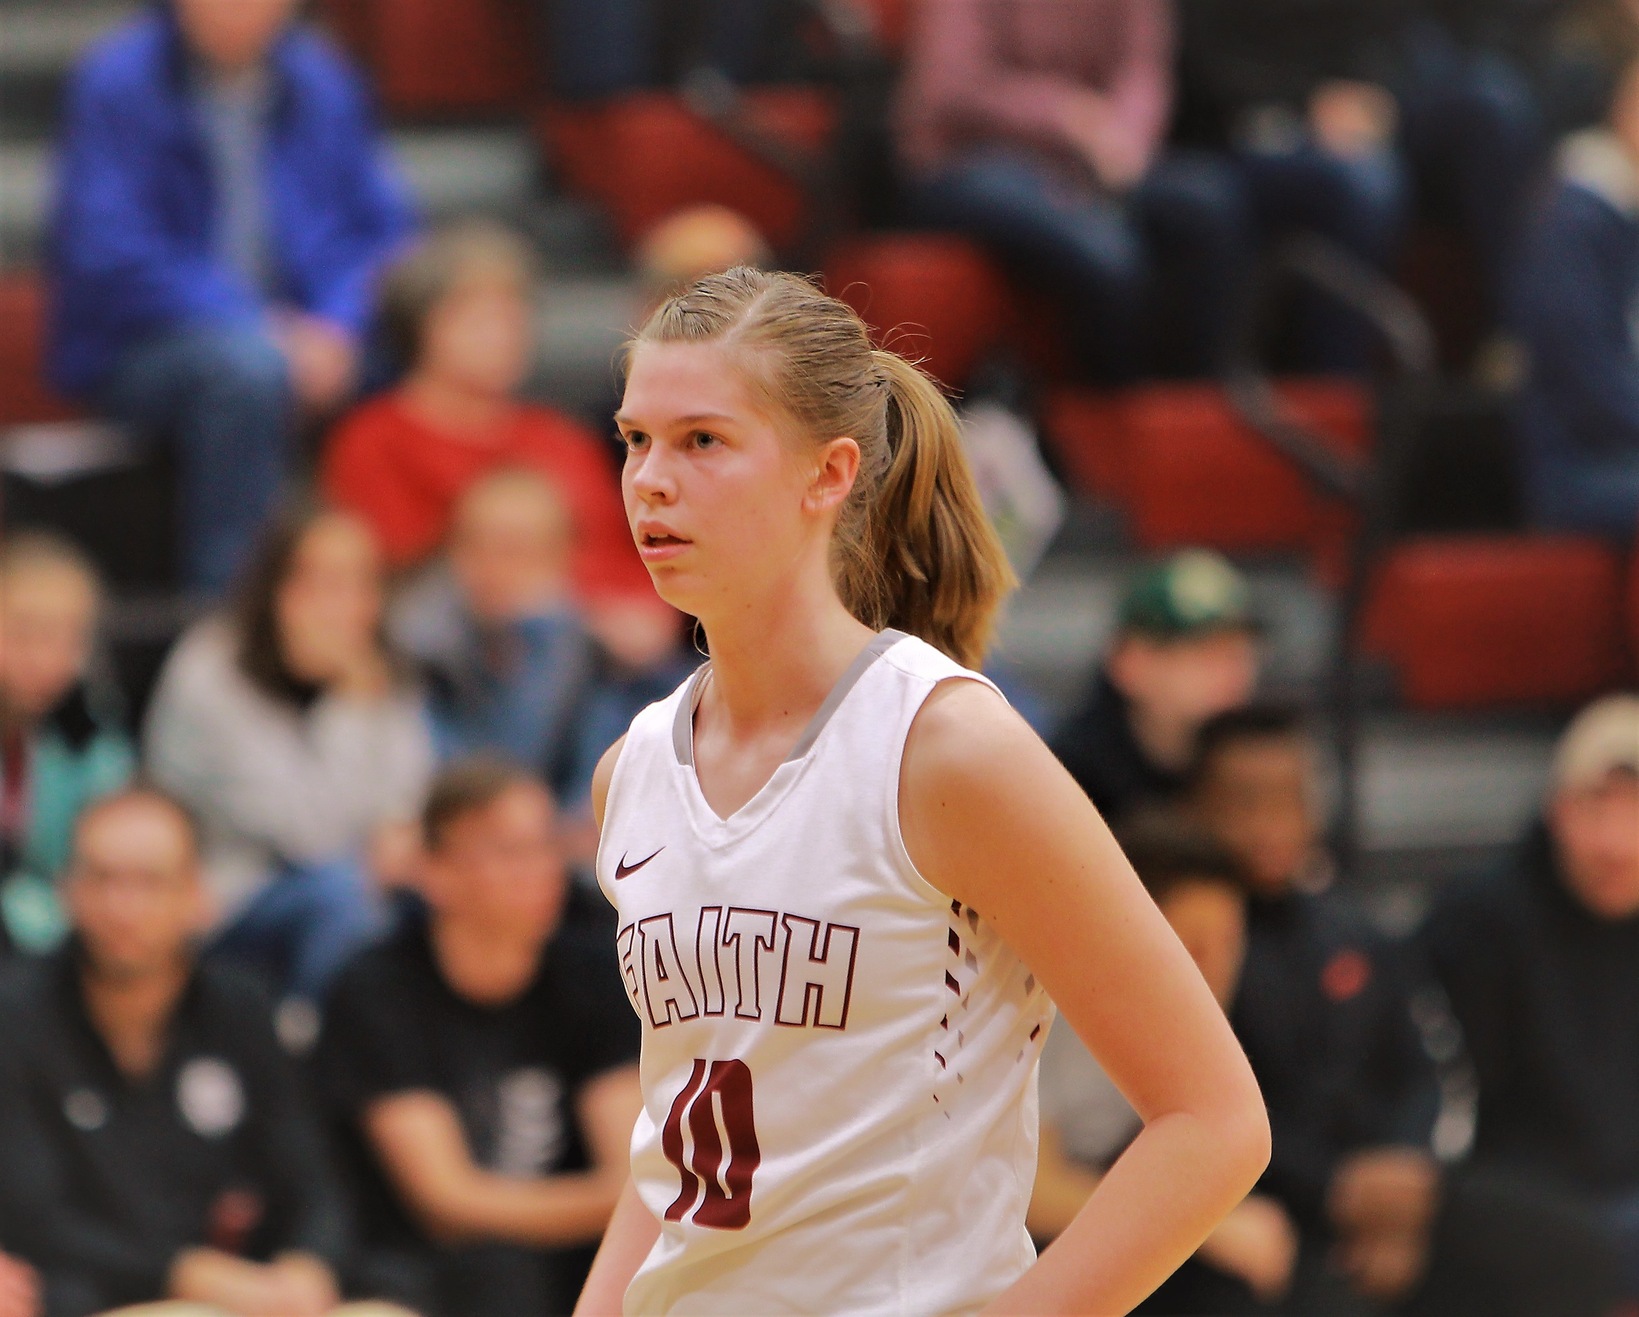 Faith Eagles sophomore Bekah Smith led the team with 10 rebounds in a loss to Ozark Christian